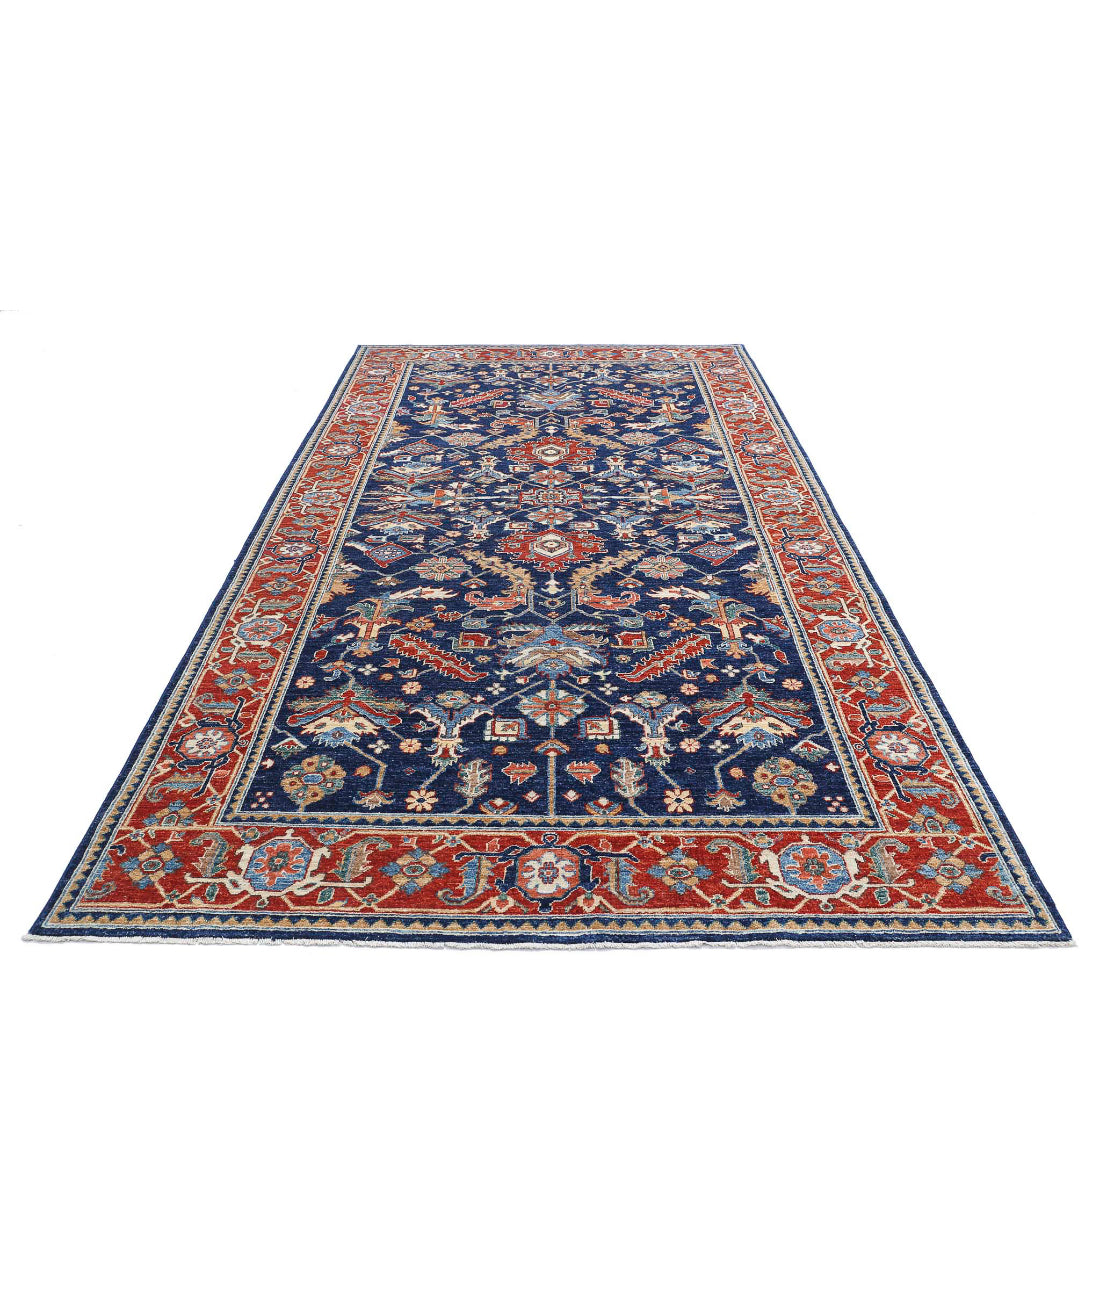 Heriz 6'2'' X 12'7'' Hand-Knotted Wool Rug 6'2'' x 12'7'' (185 X 378) / Blue / Red